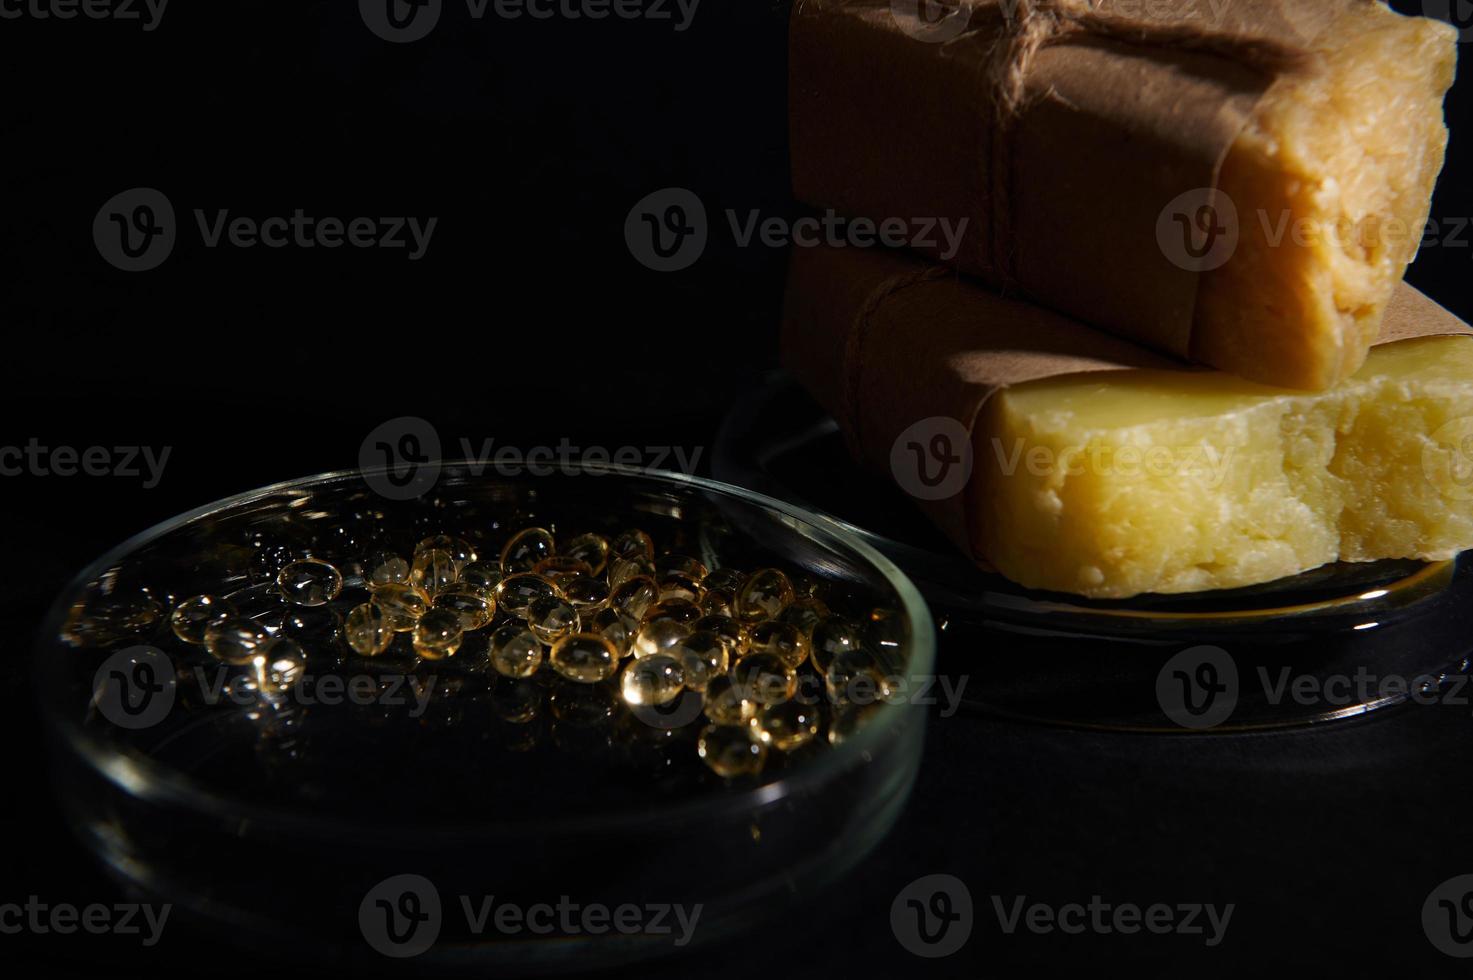 Translucent gel capsules with essential acids and oils in laboratory Petri dish against organic bars of soap on black photo